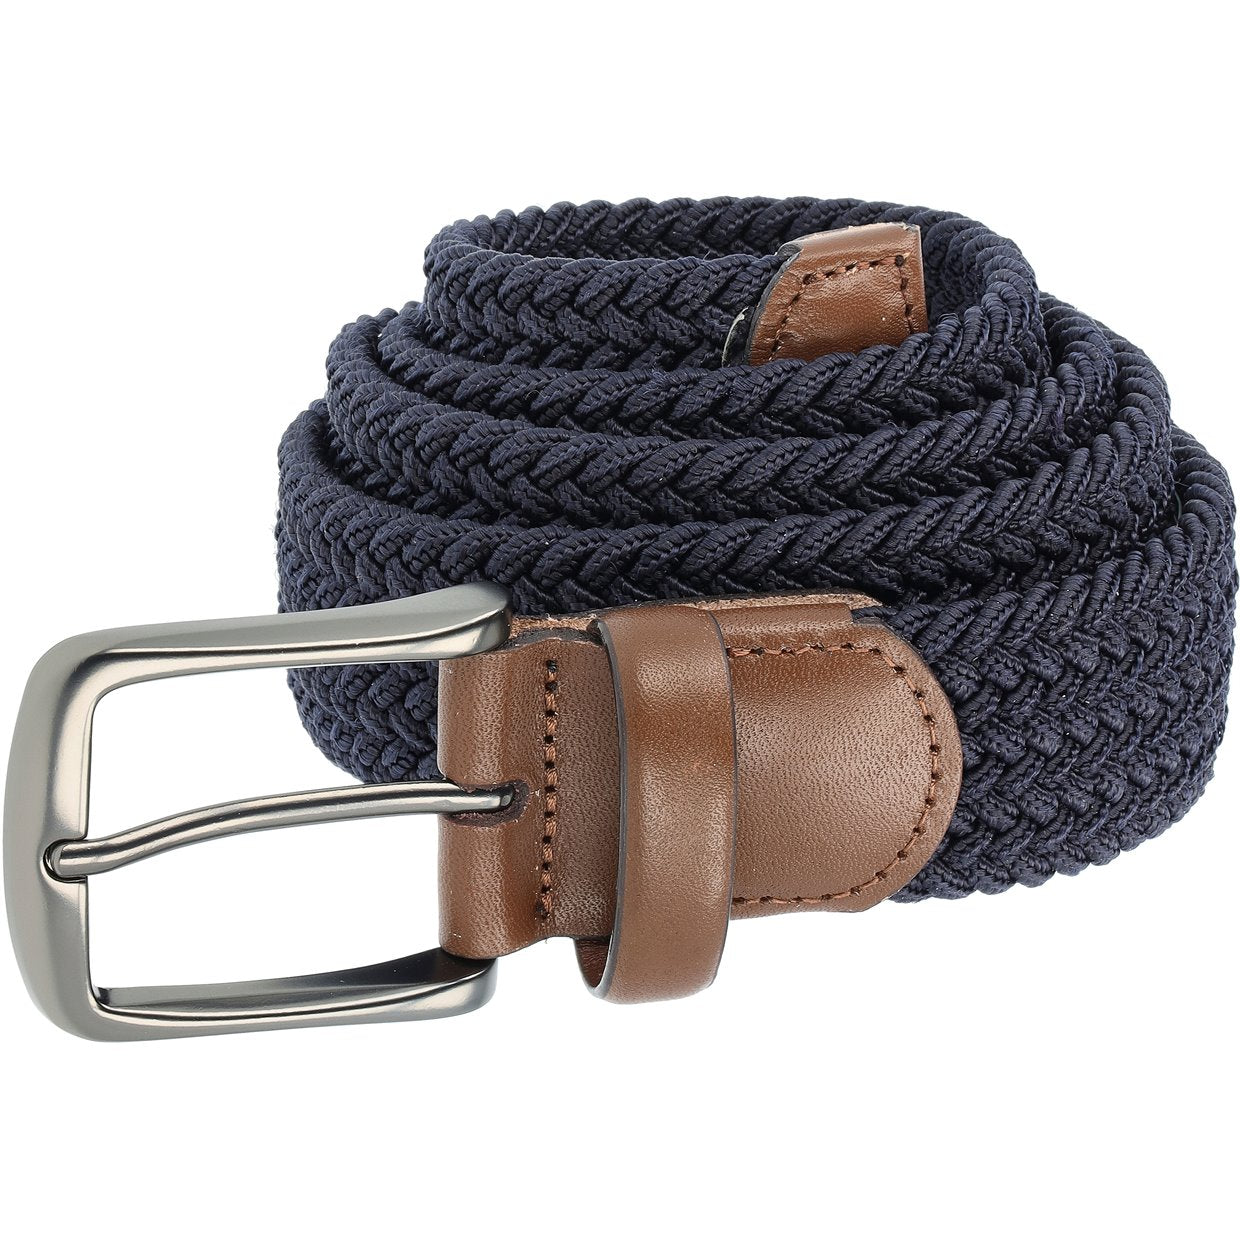 Men's Leather Tab Solid Color Braided Belt at Sportif